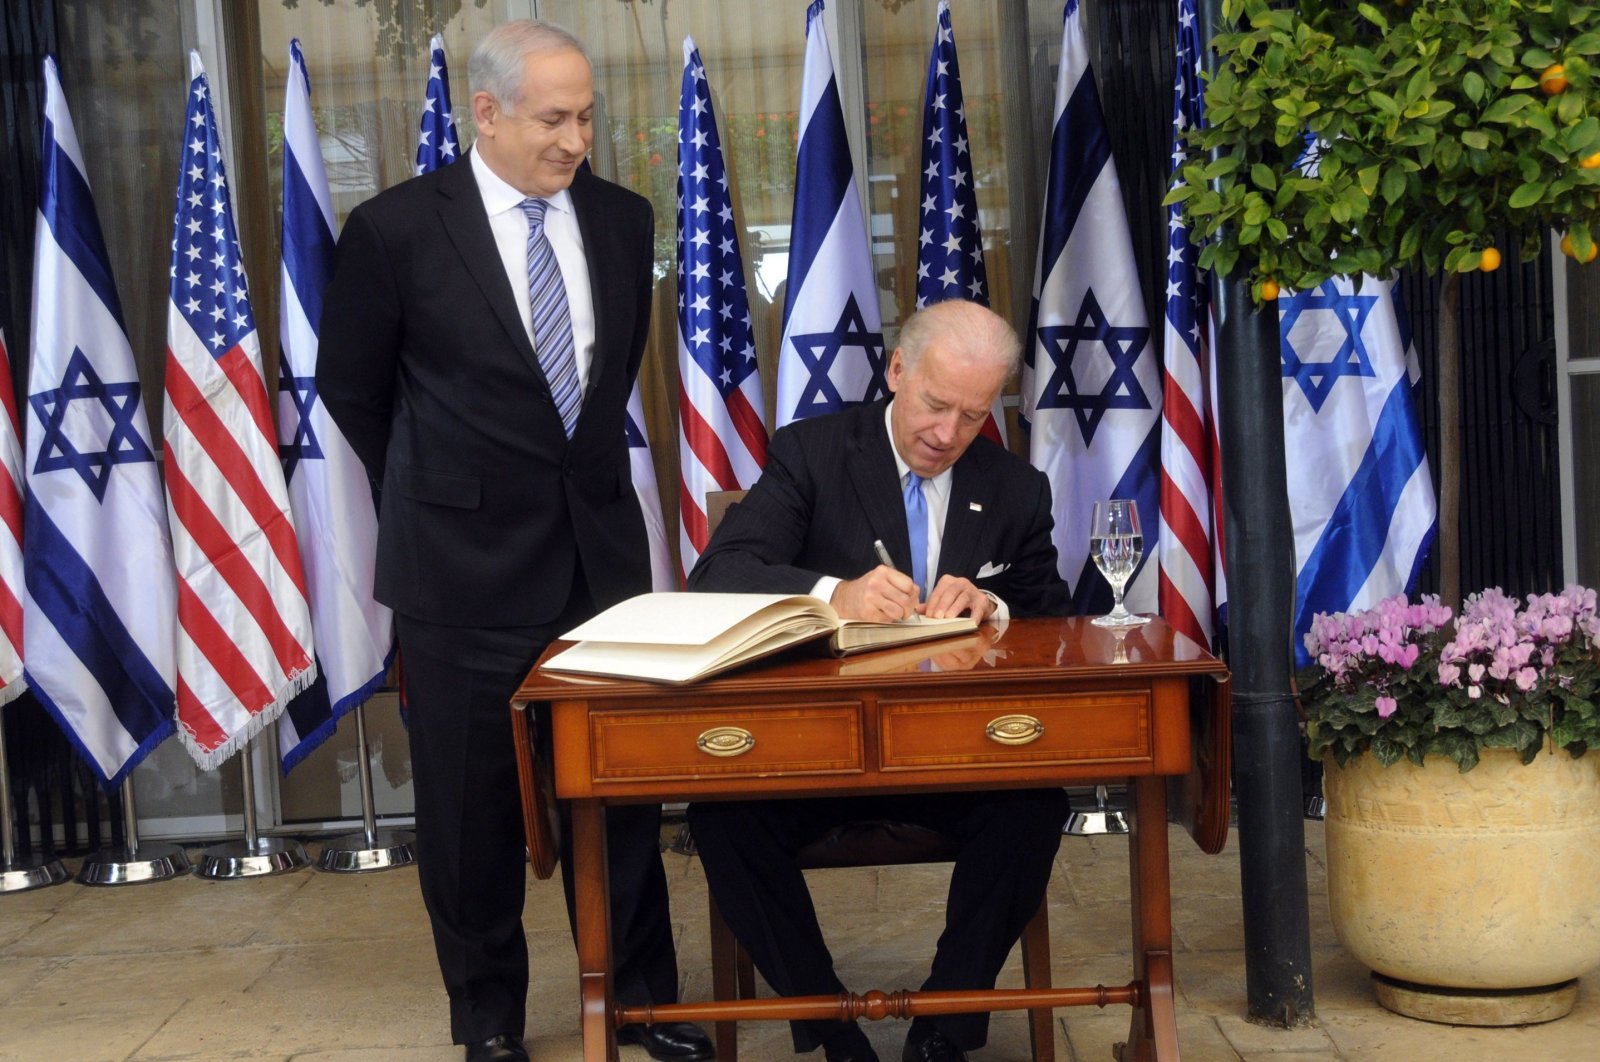 Israeli Prime Minister Benjamin Netanyahu (L) watches then U.S. Vice President Joe Biden sign the guestbook at his residence in Jerusalem, March 9, 2010. (EPA Photo)